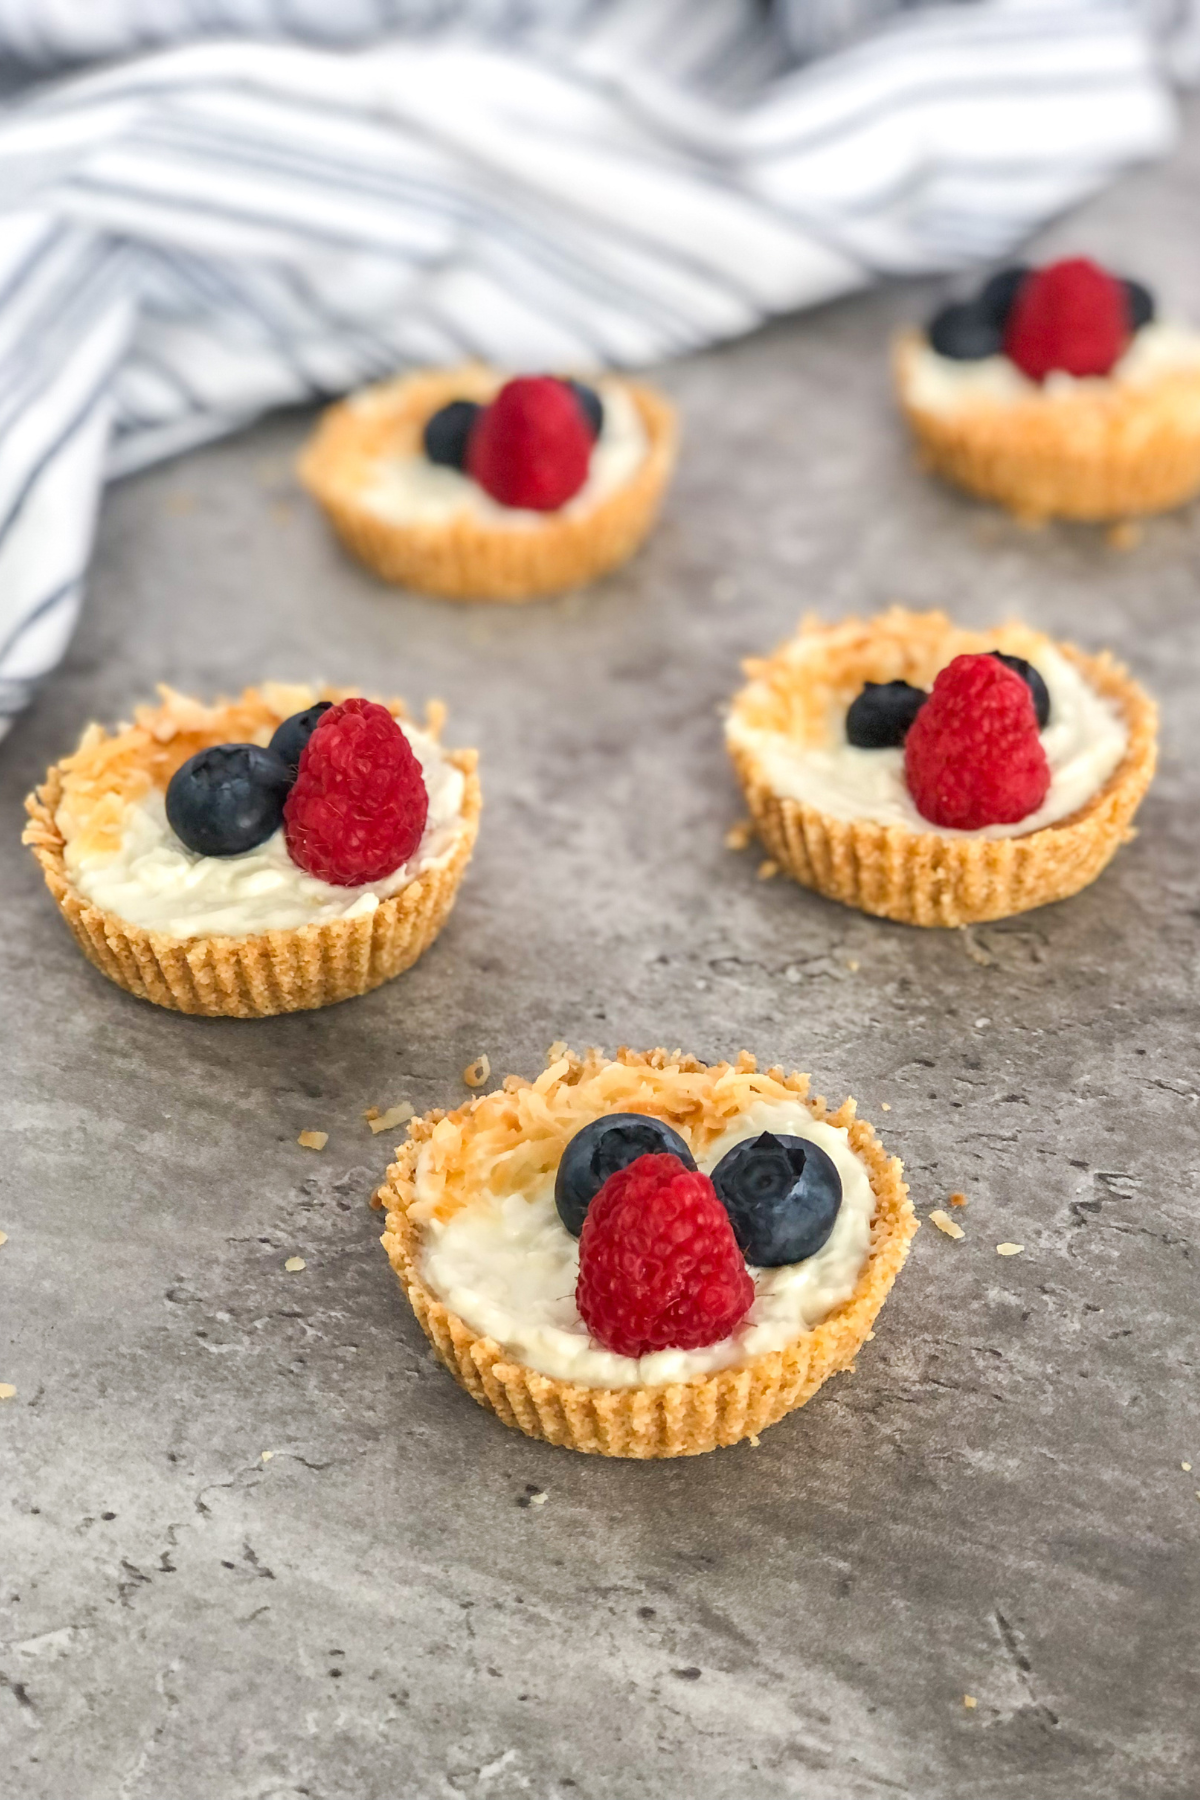 mini coconut tarts with yogurt and berries in front of a white and blue striped kitchen towel